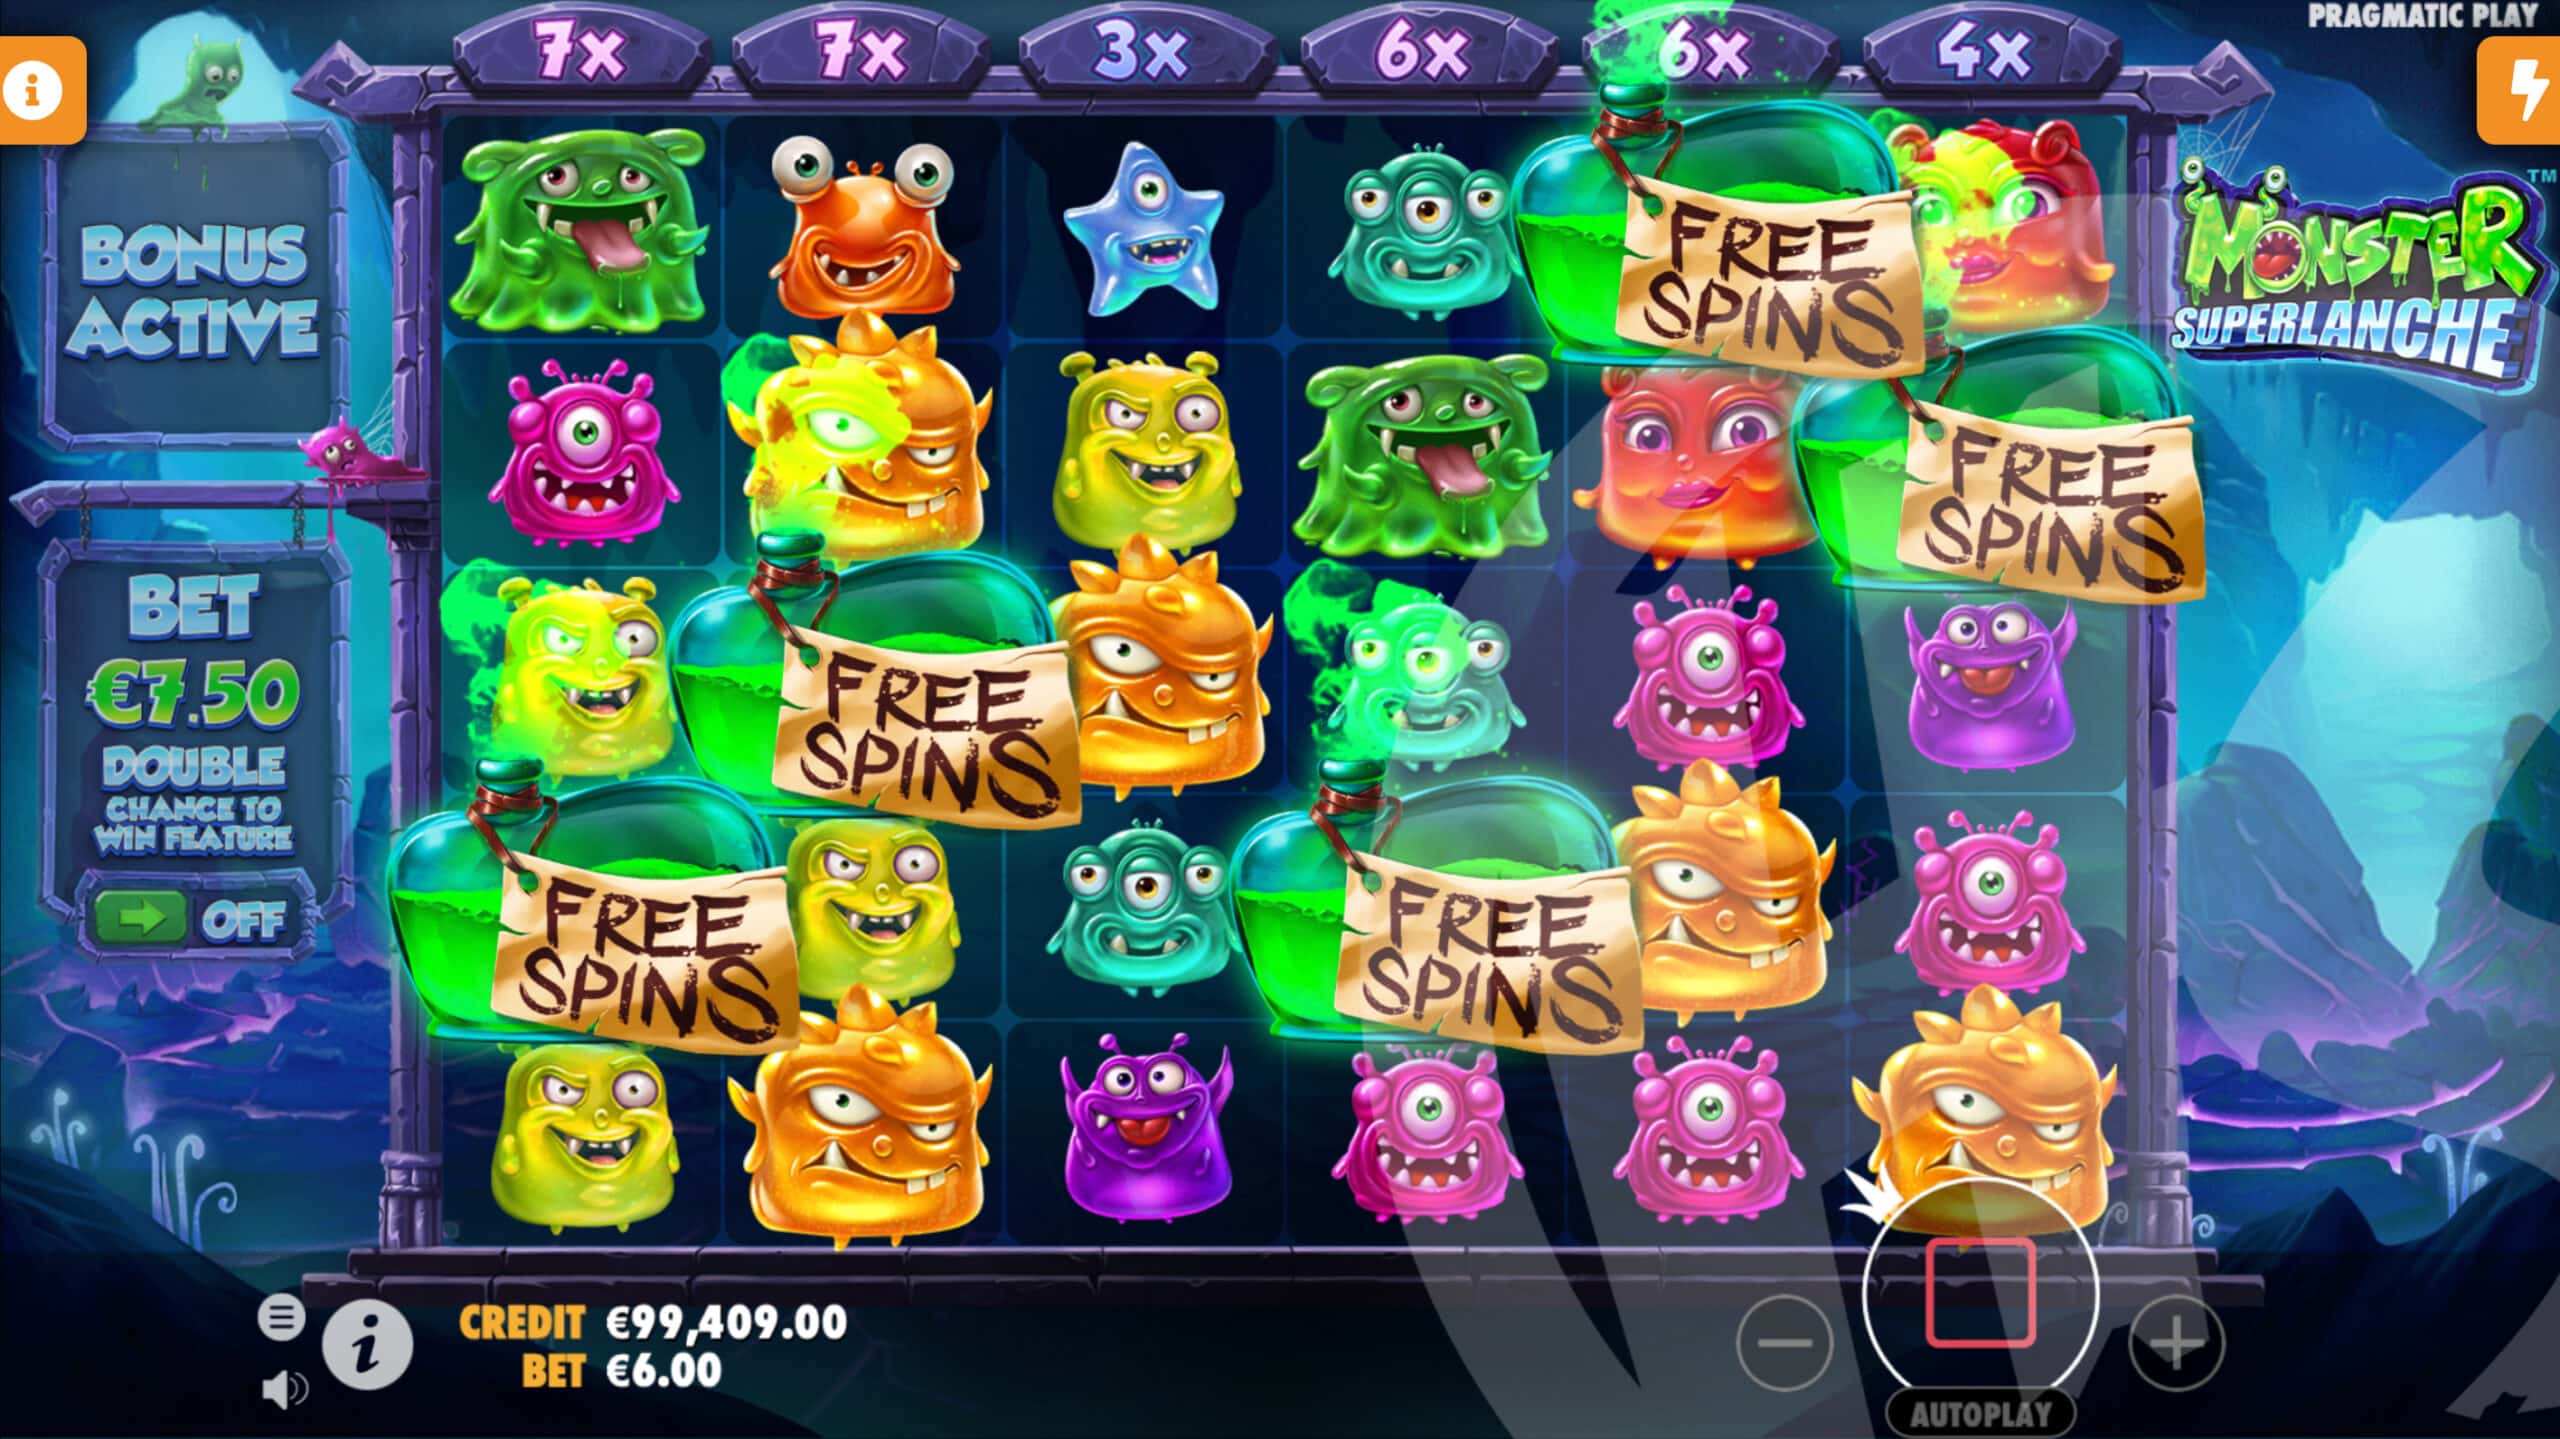 Land 4 or More Scatters to Trigger Free Spins